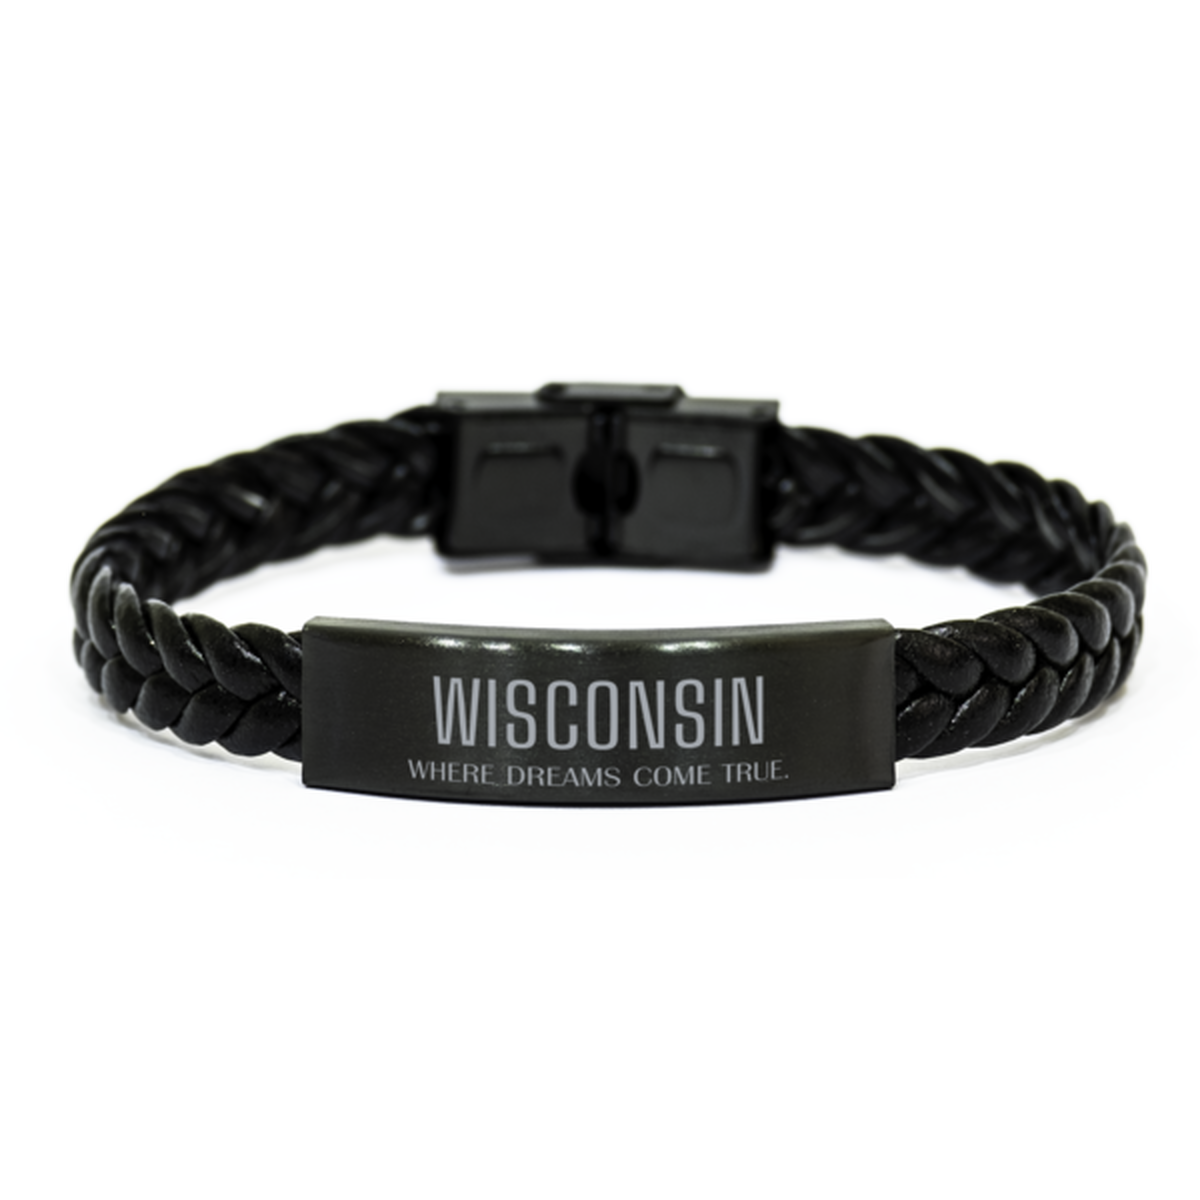 Love Wisconsin State Braided Leather Bracelet, Wisconsin Where dreams come true, Birthday Inspirational Gifts For Wisconsin Men, Women, Friends